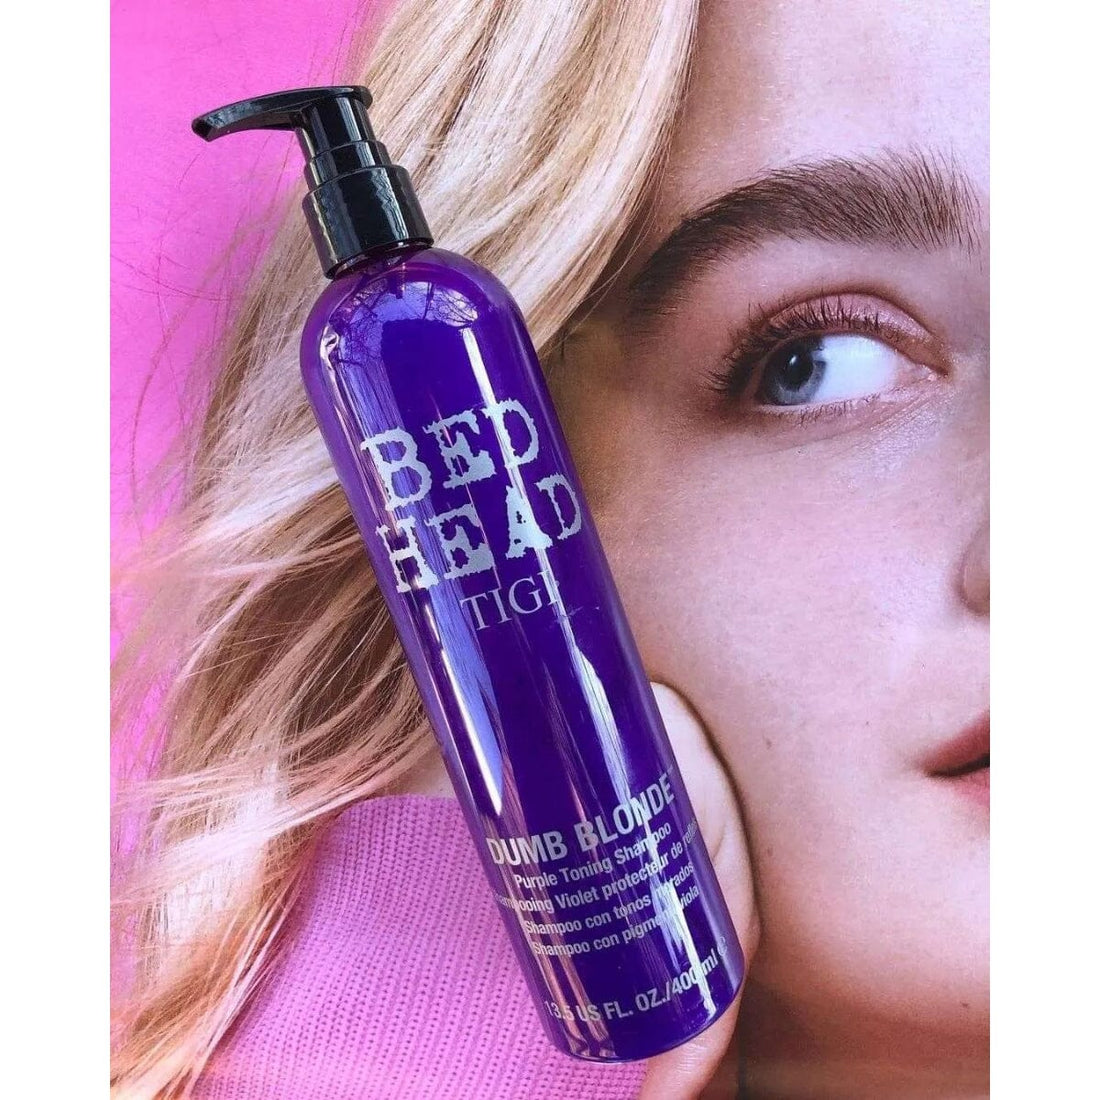 Bed Head by Blonde Purple Toning Shampoo -